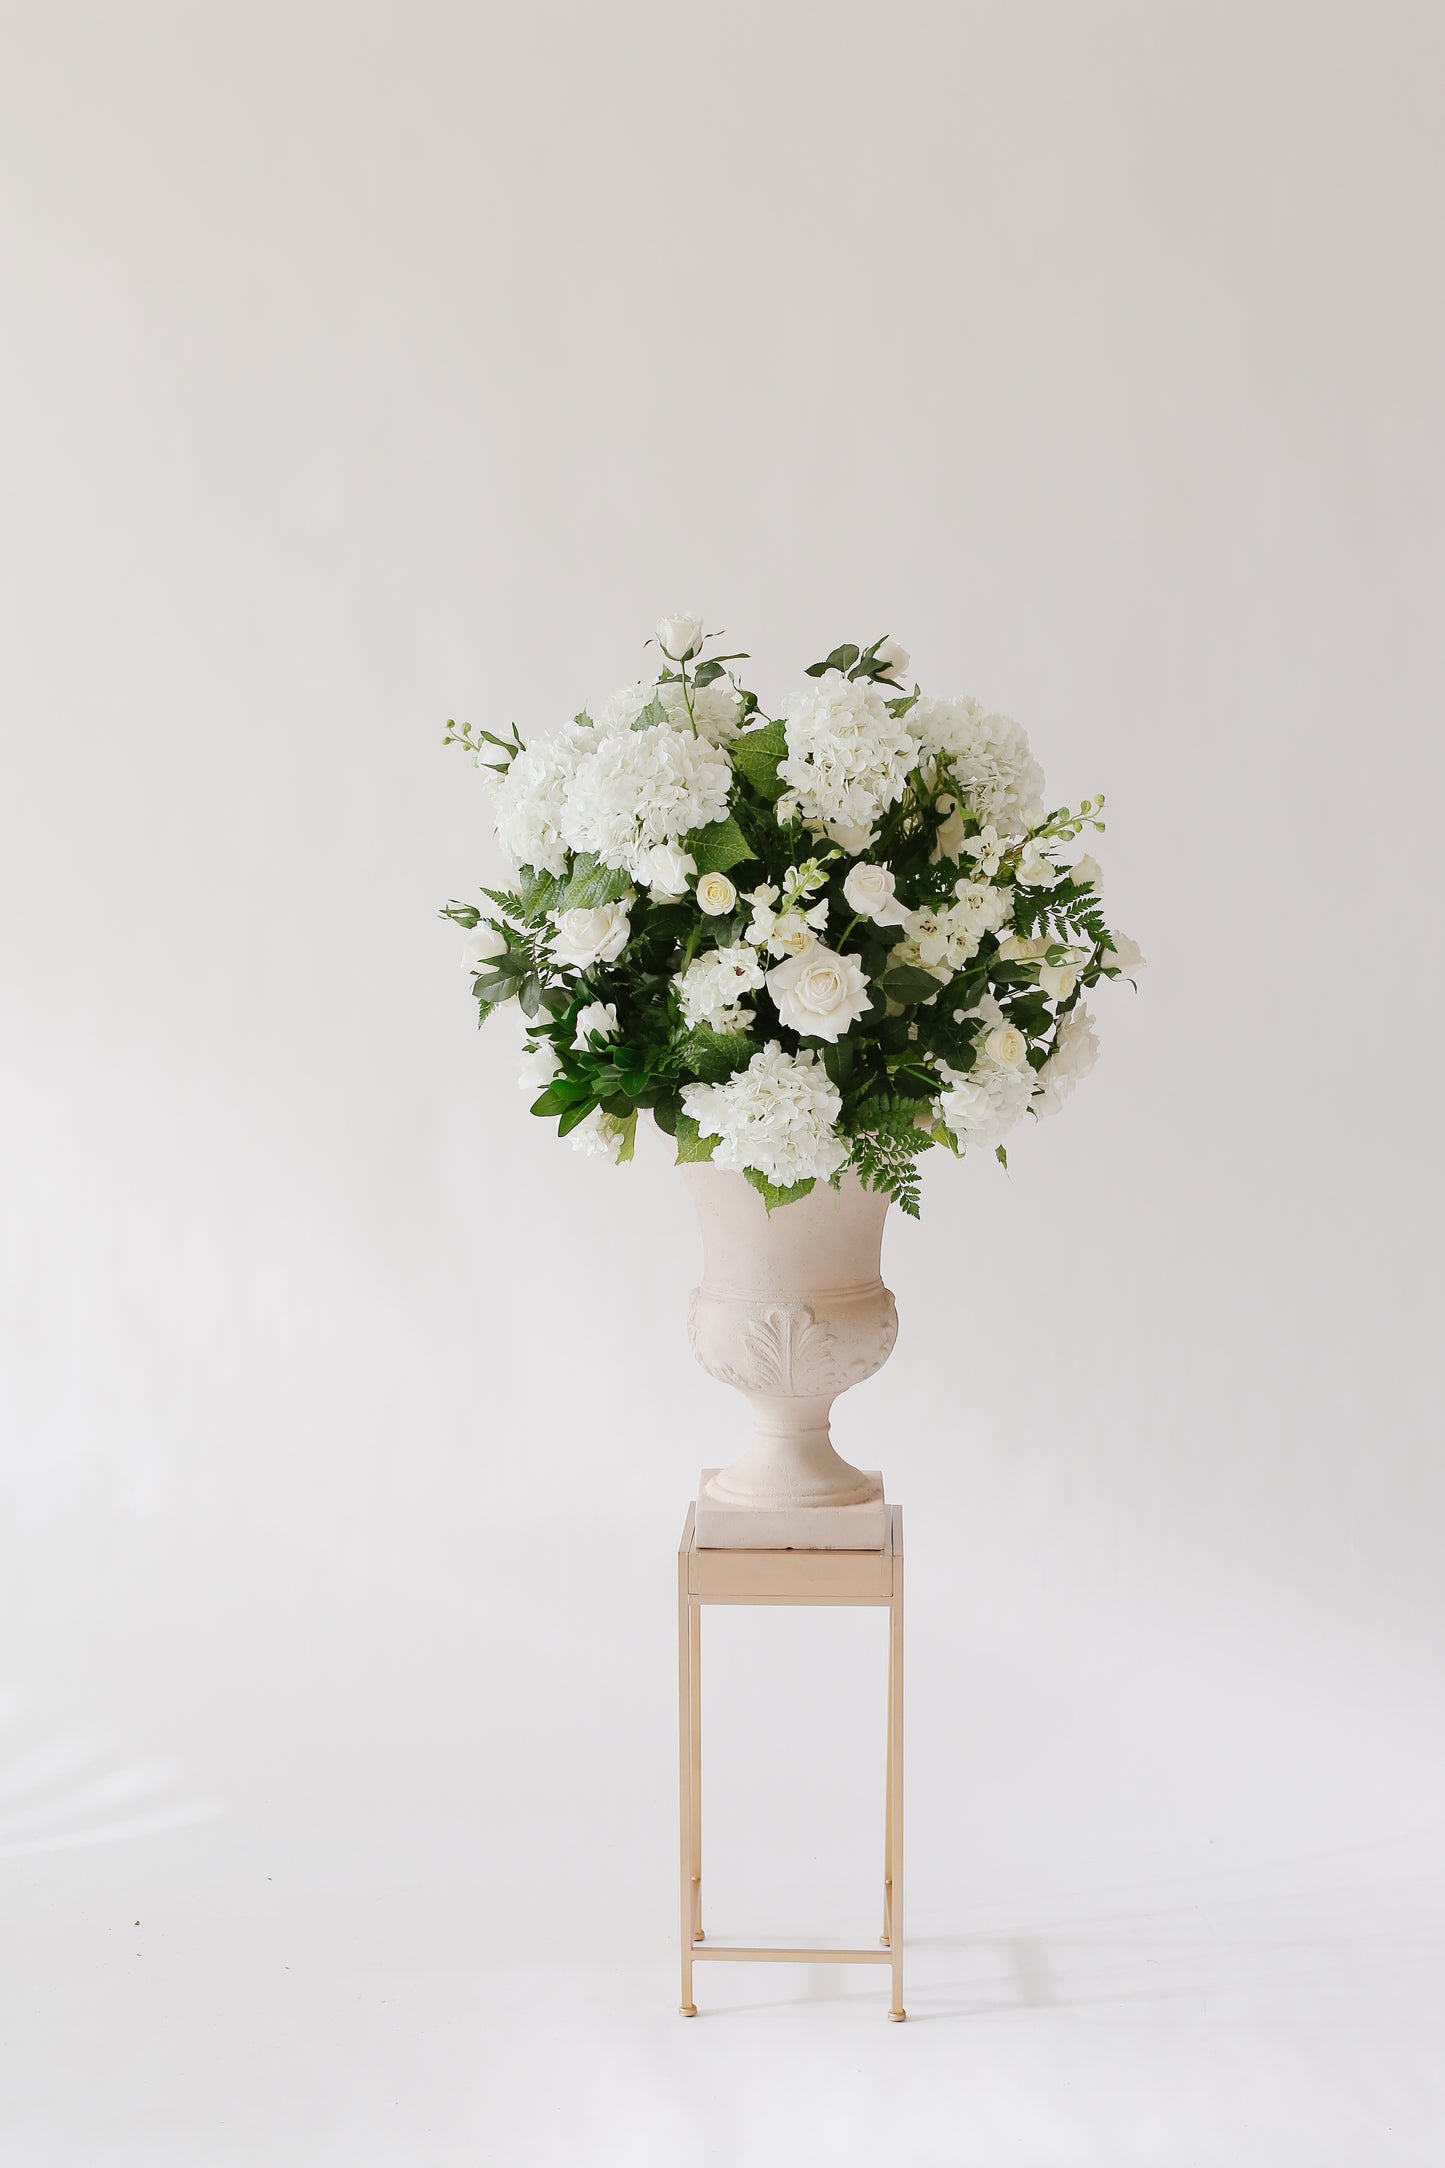 The Romantic Floral Urns